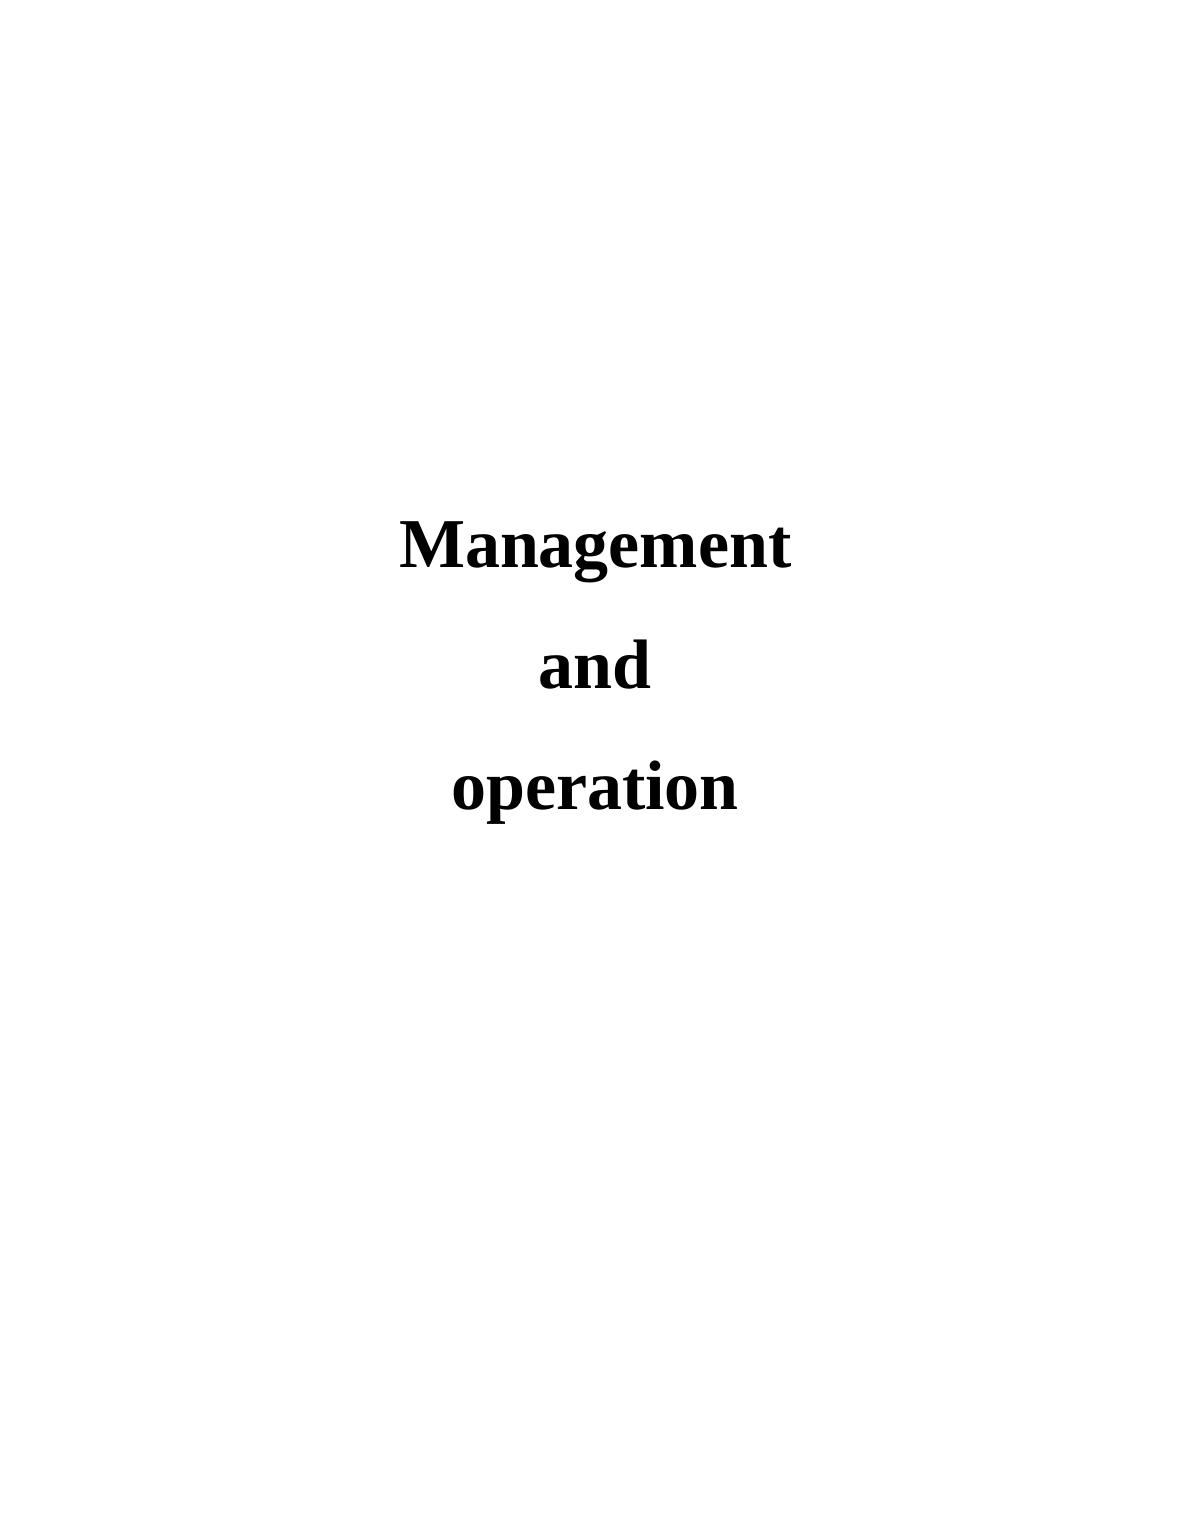 Management and Operation of Amazon: Doc_1